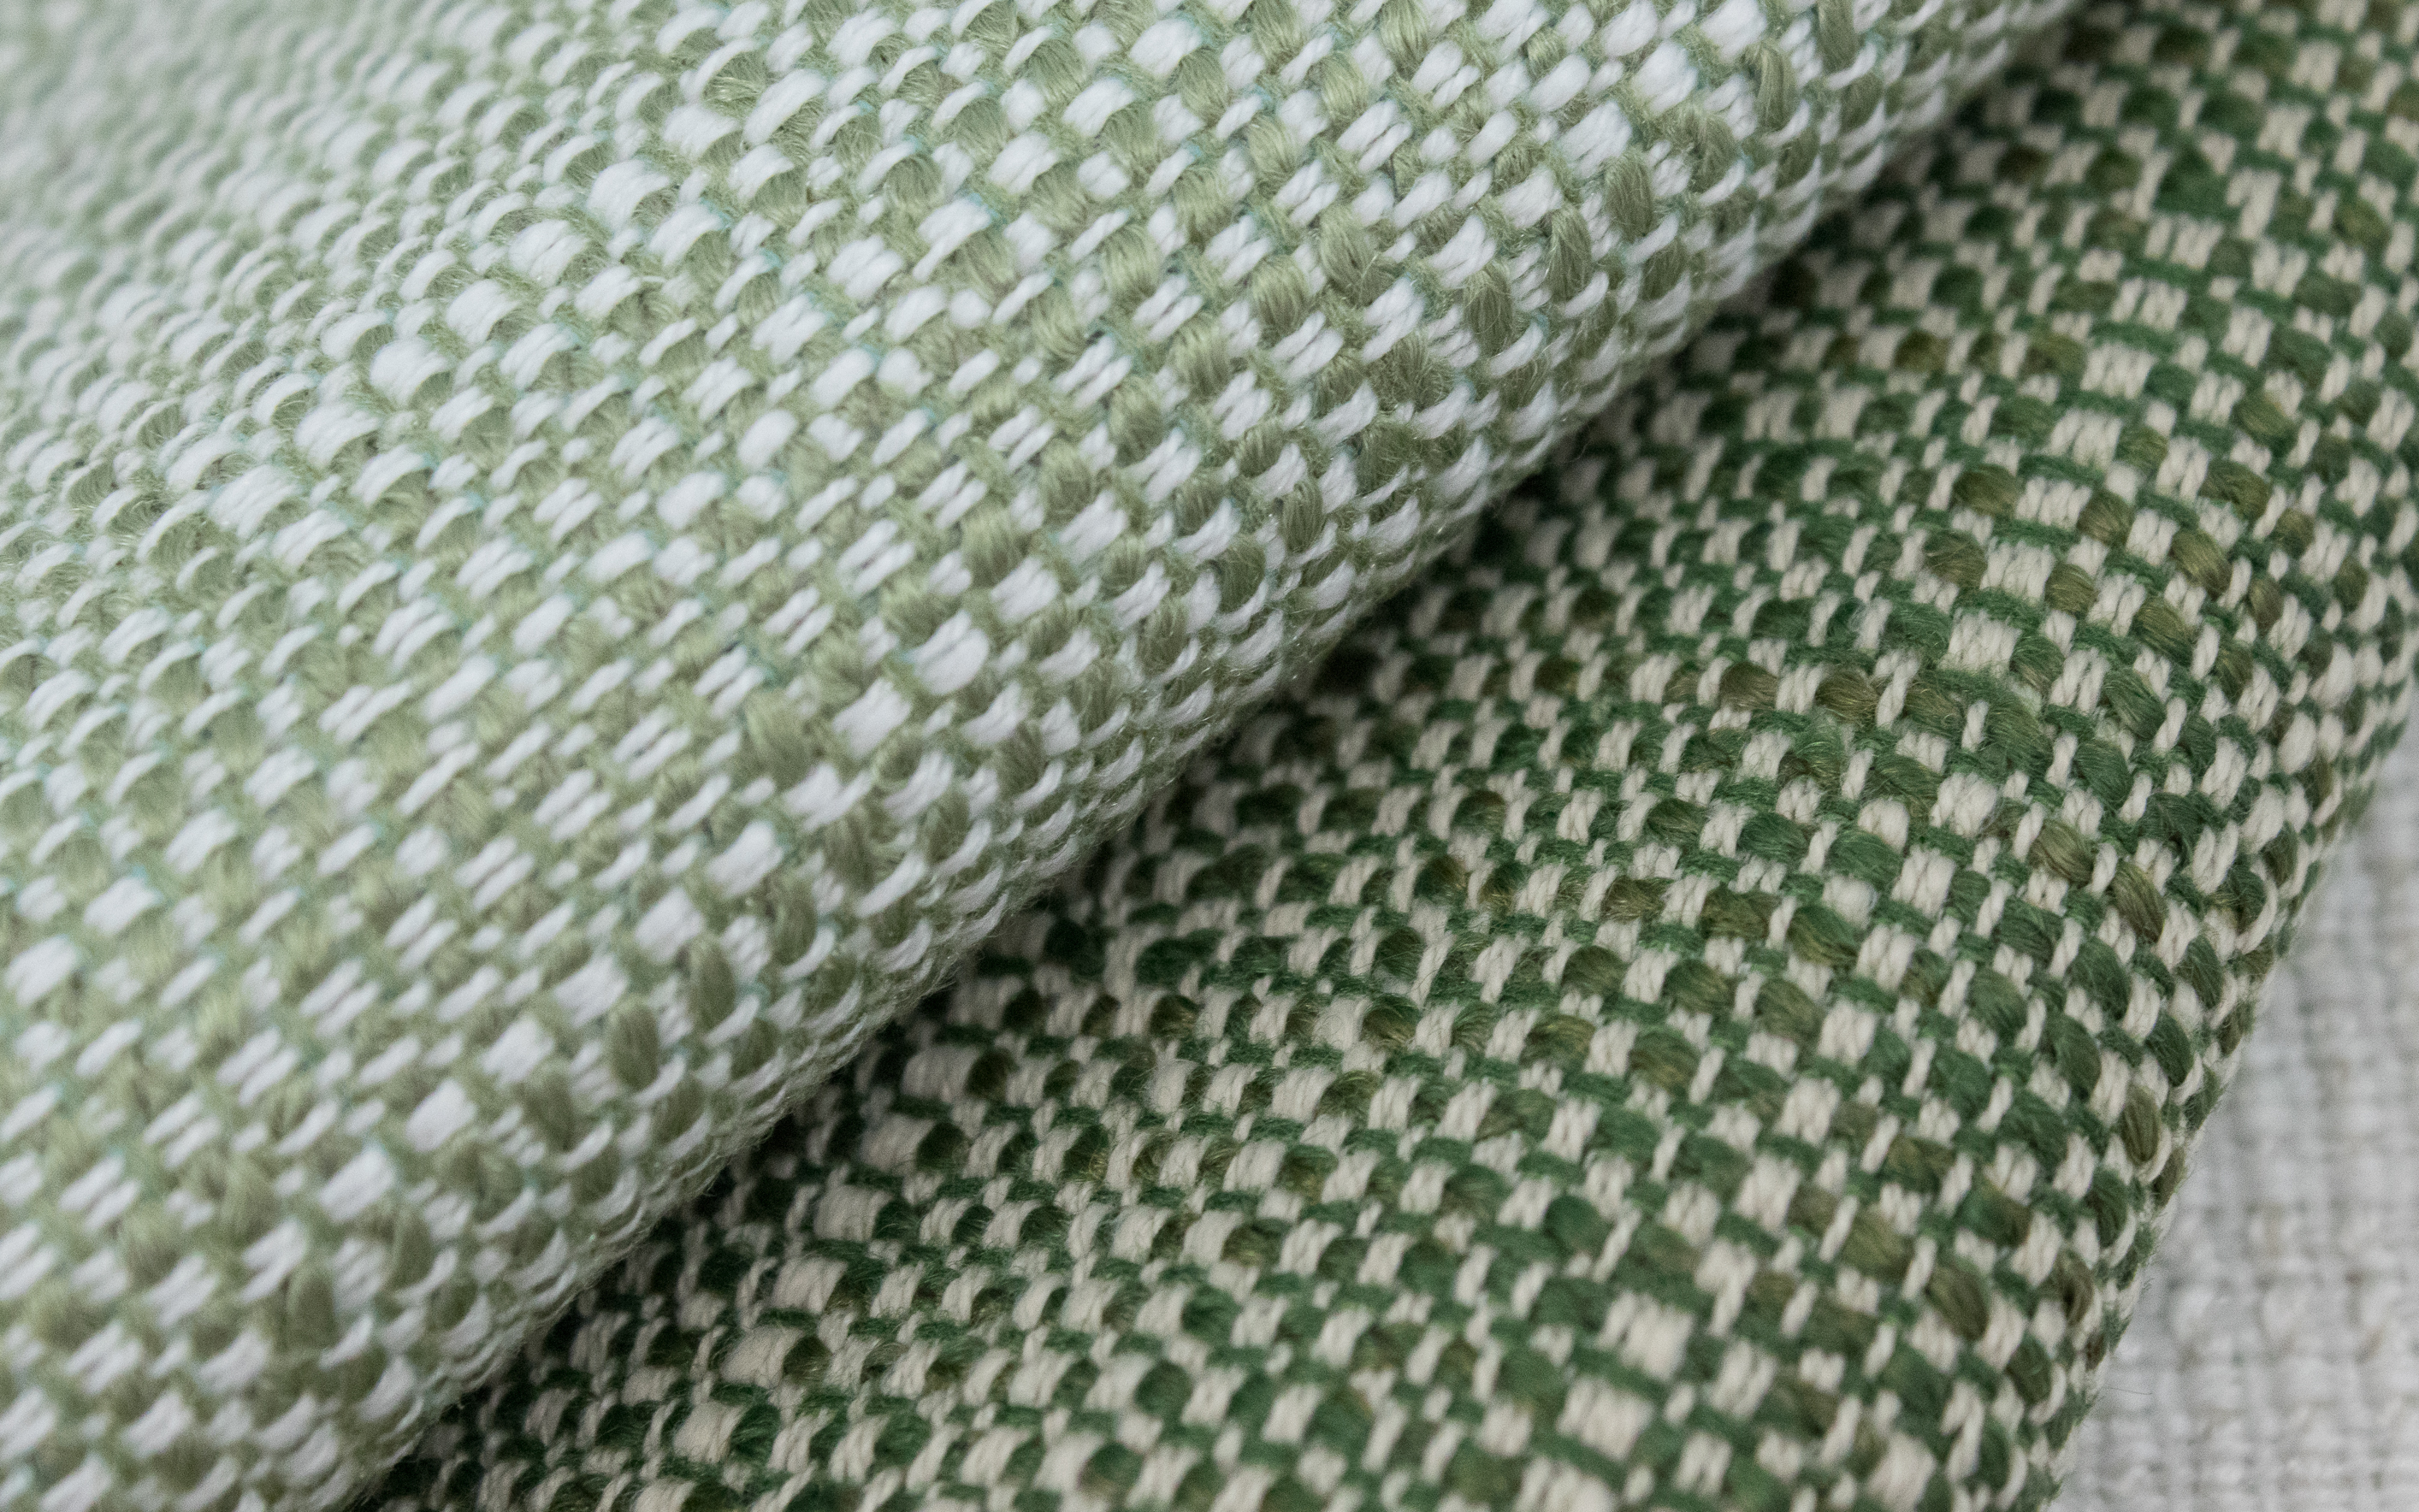 Friendly Indoor Outdoor Performance Textile | Green Tweed Inside Out Performance Fabric Bleach Cleanable